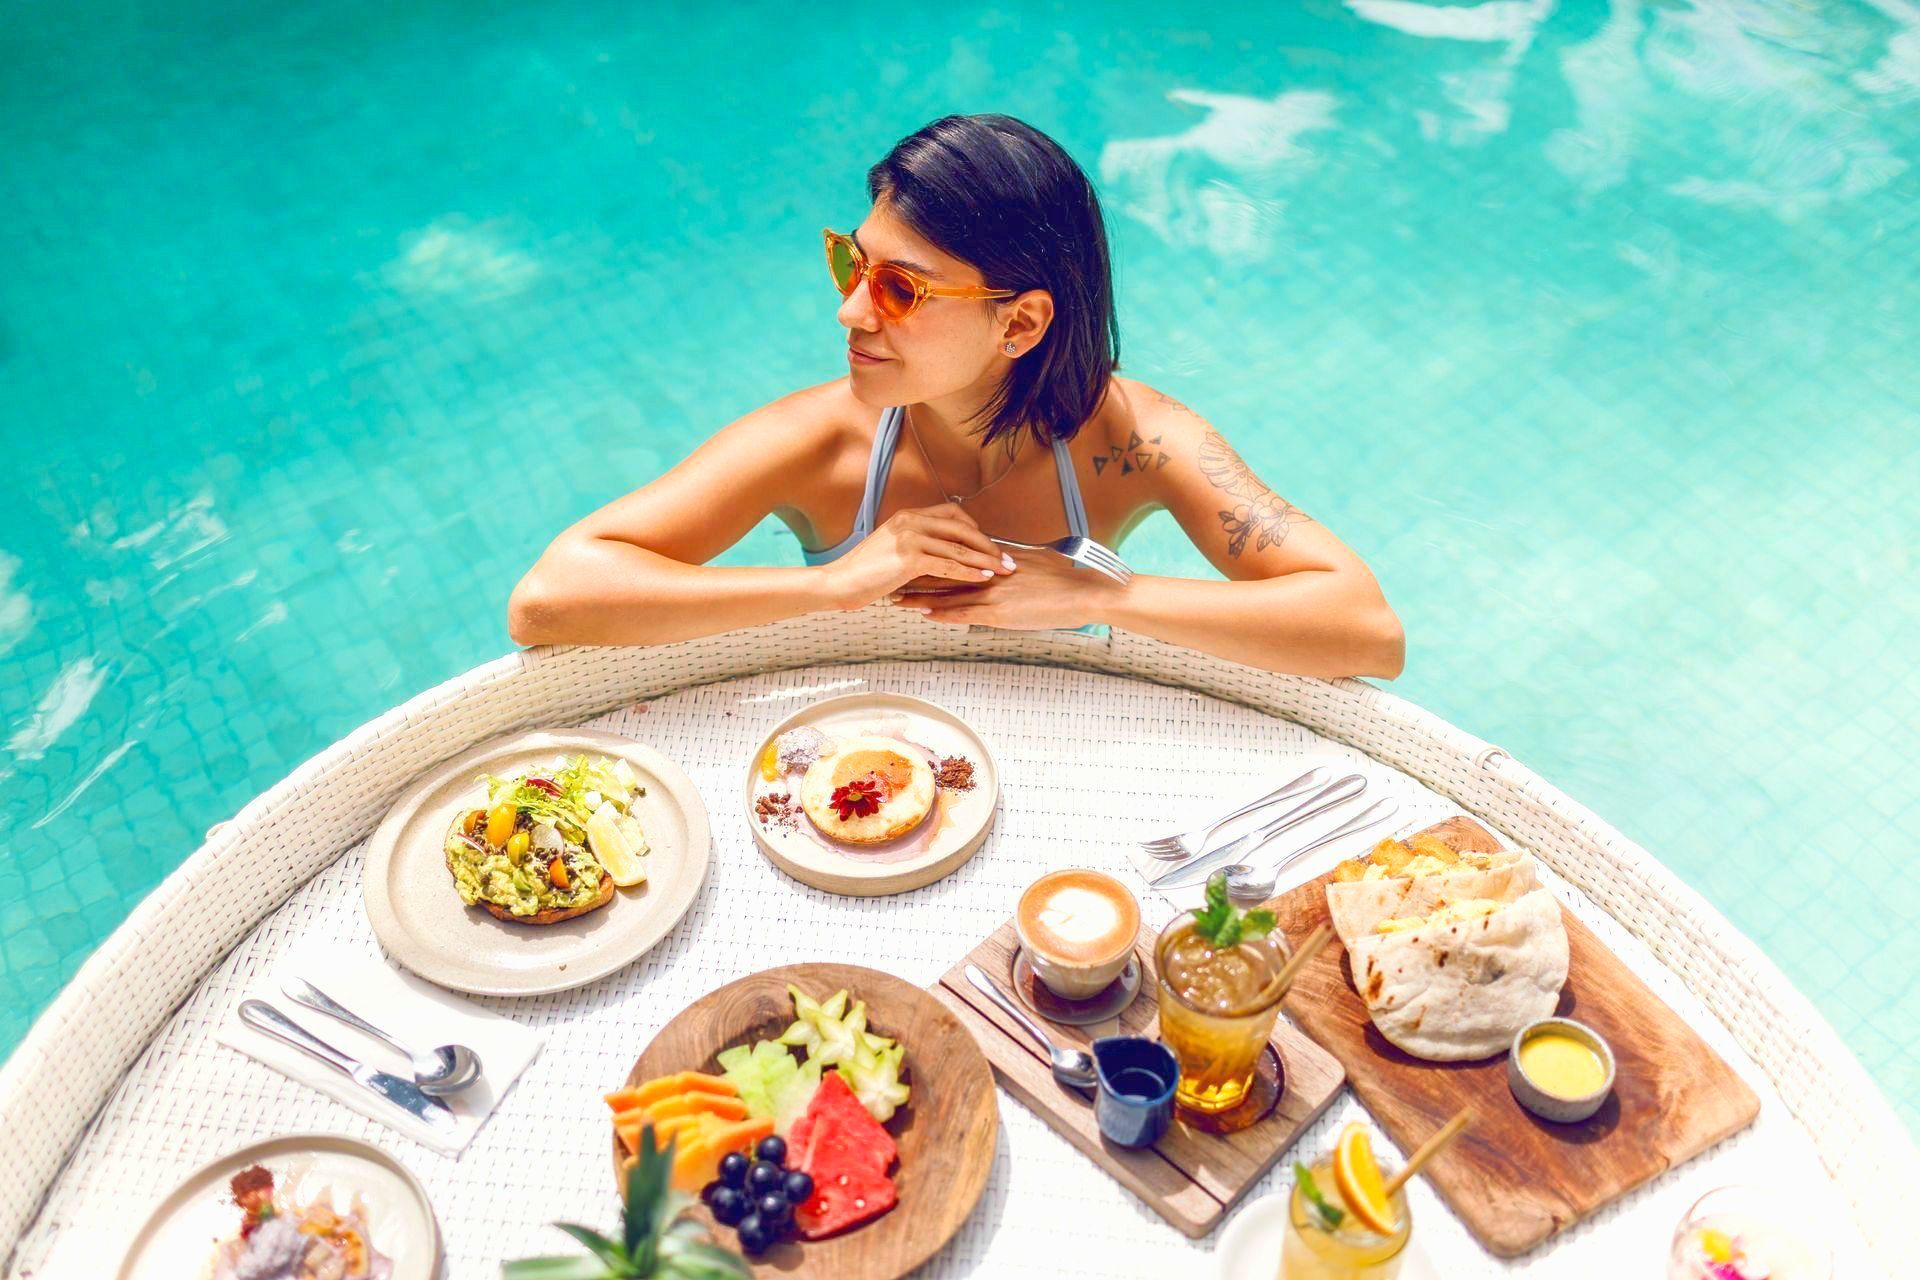 A woman is sitting at a table with food in a swimming pool.